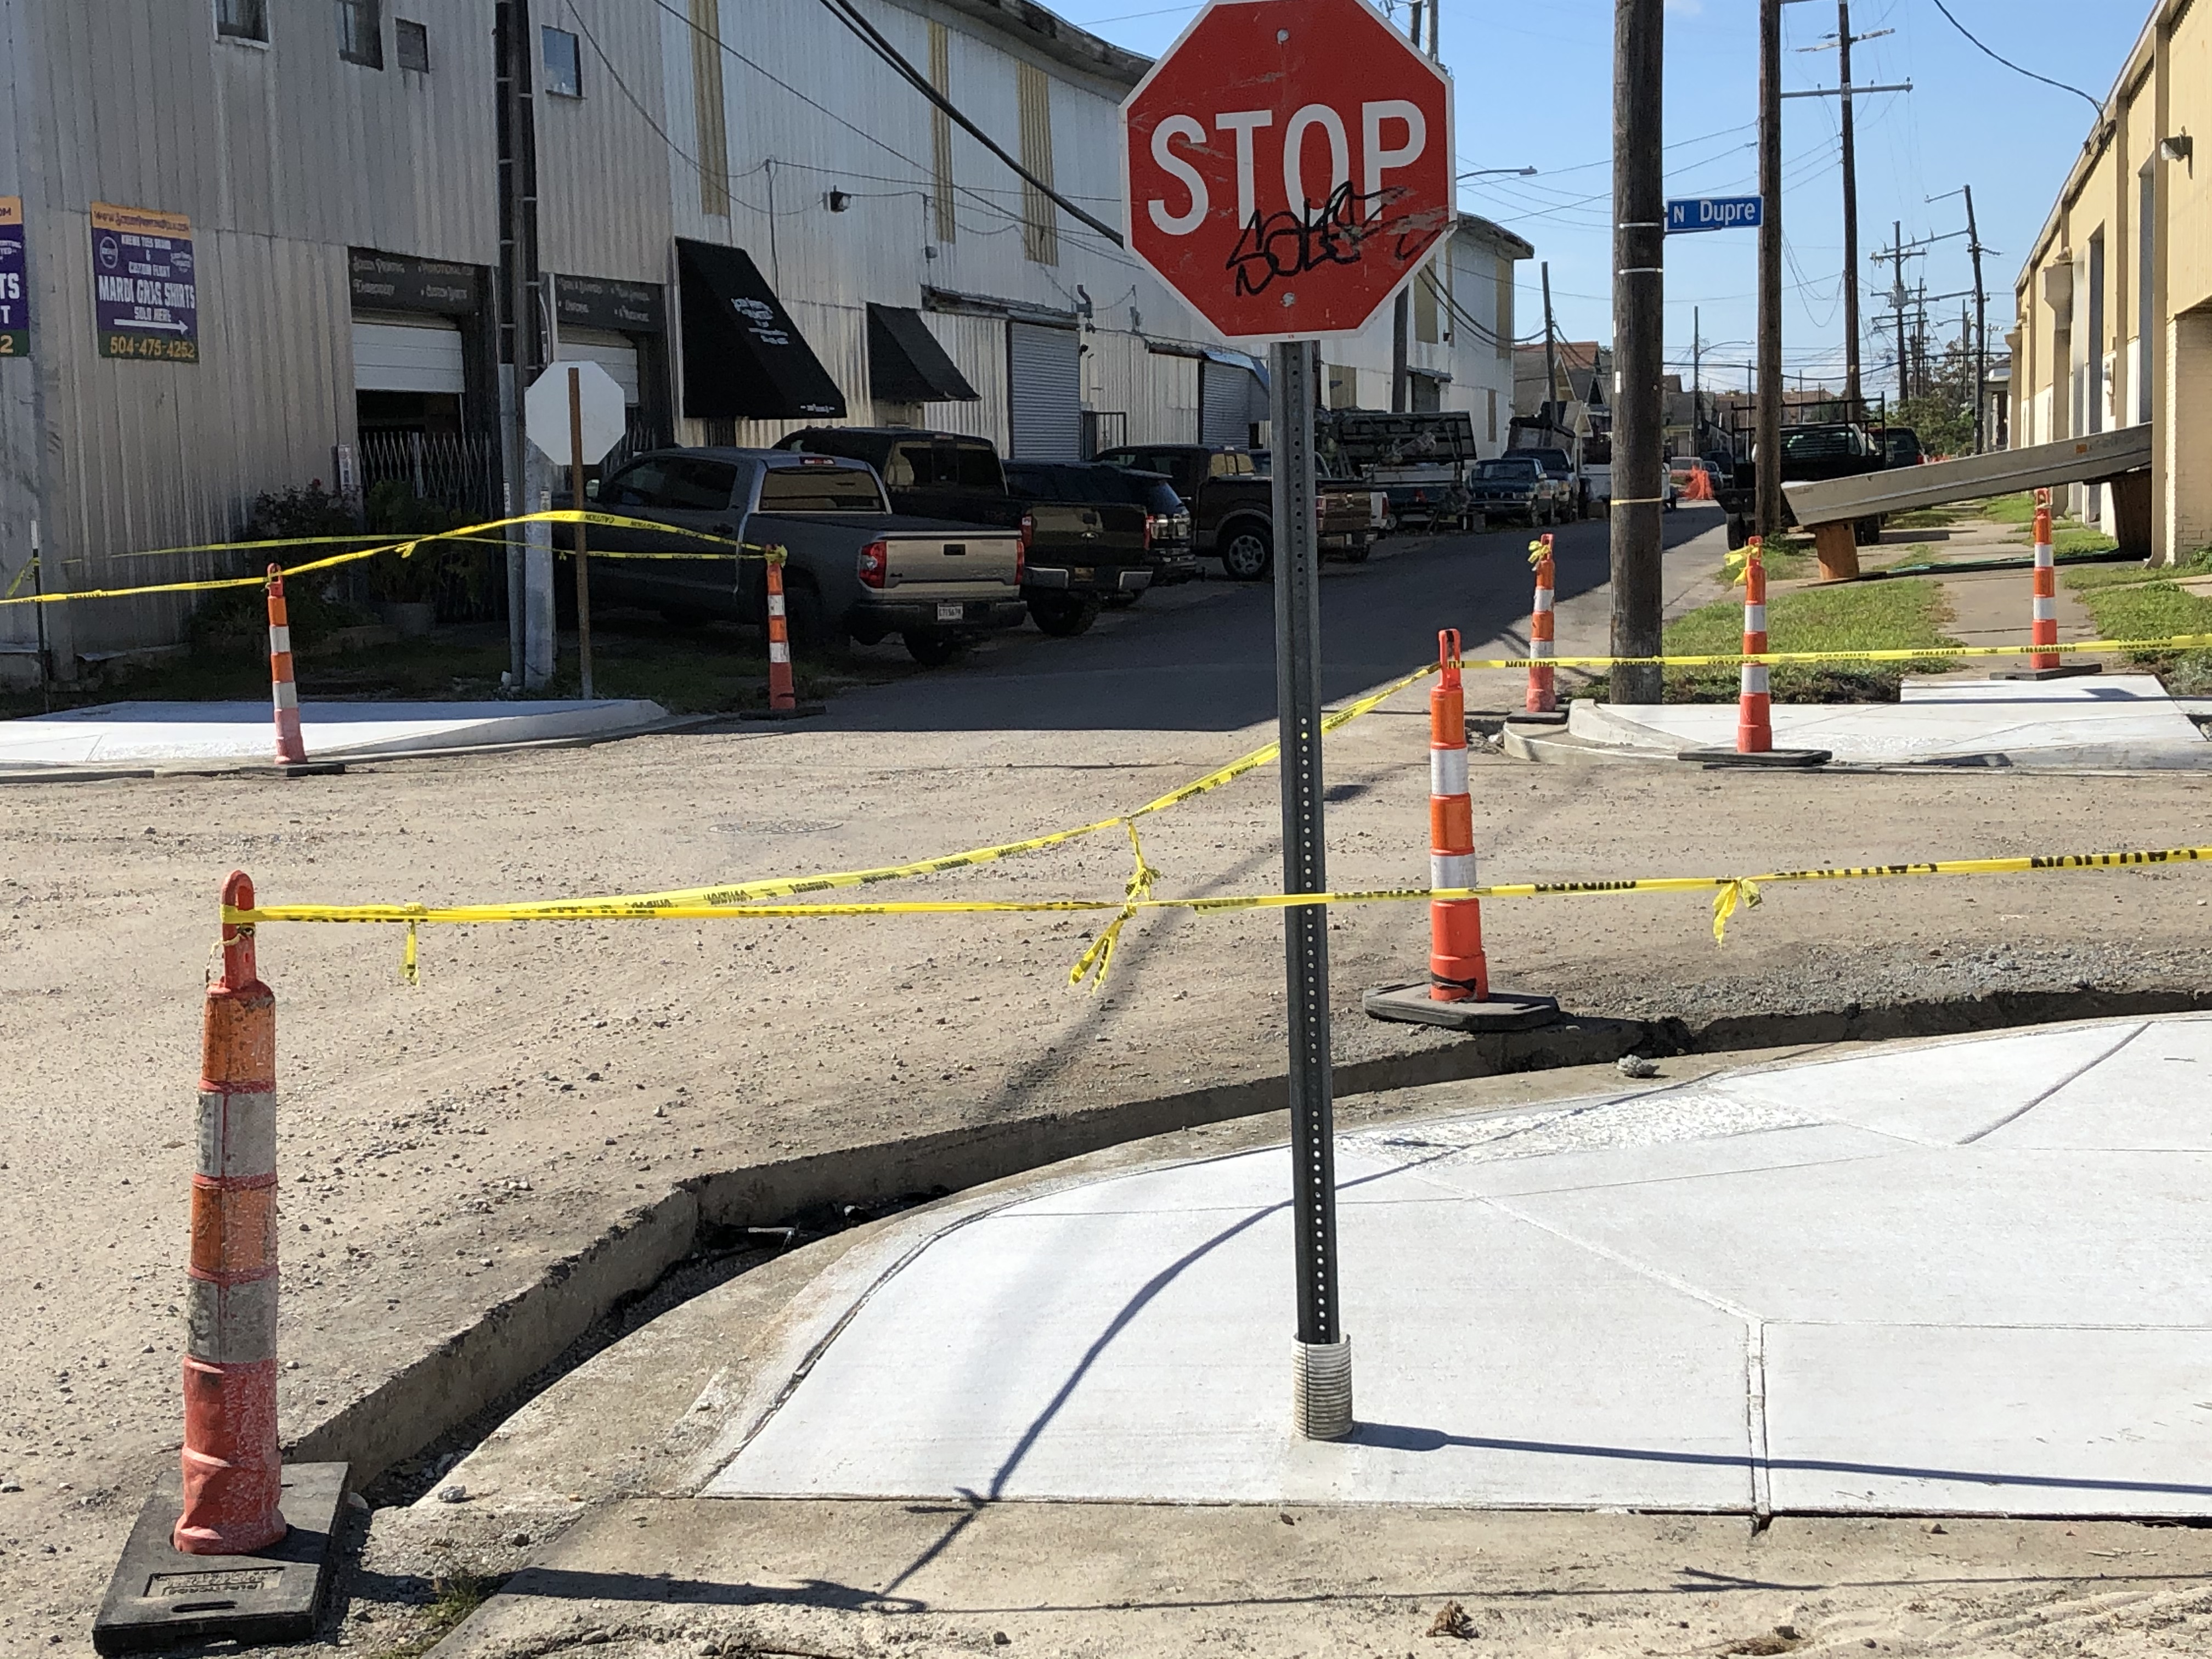 DRAINAGE SYSTEM FULLY CONNECTED, STREET PAVING PREP CONTINUES